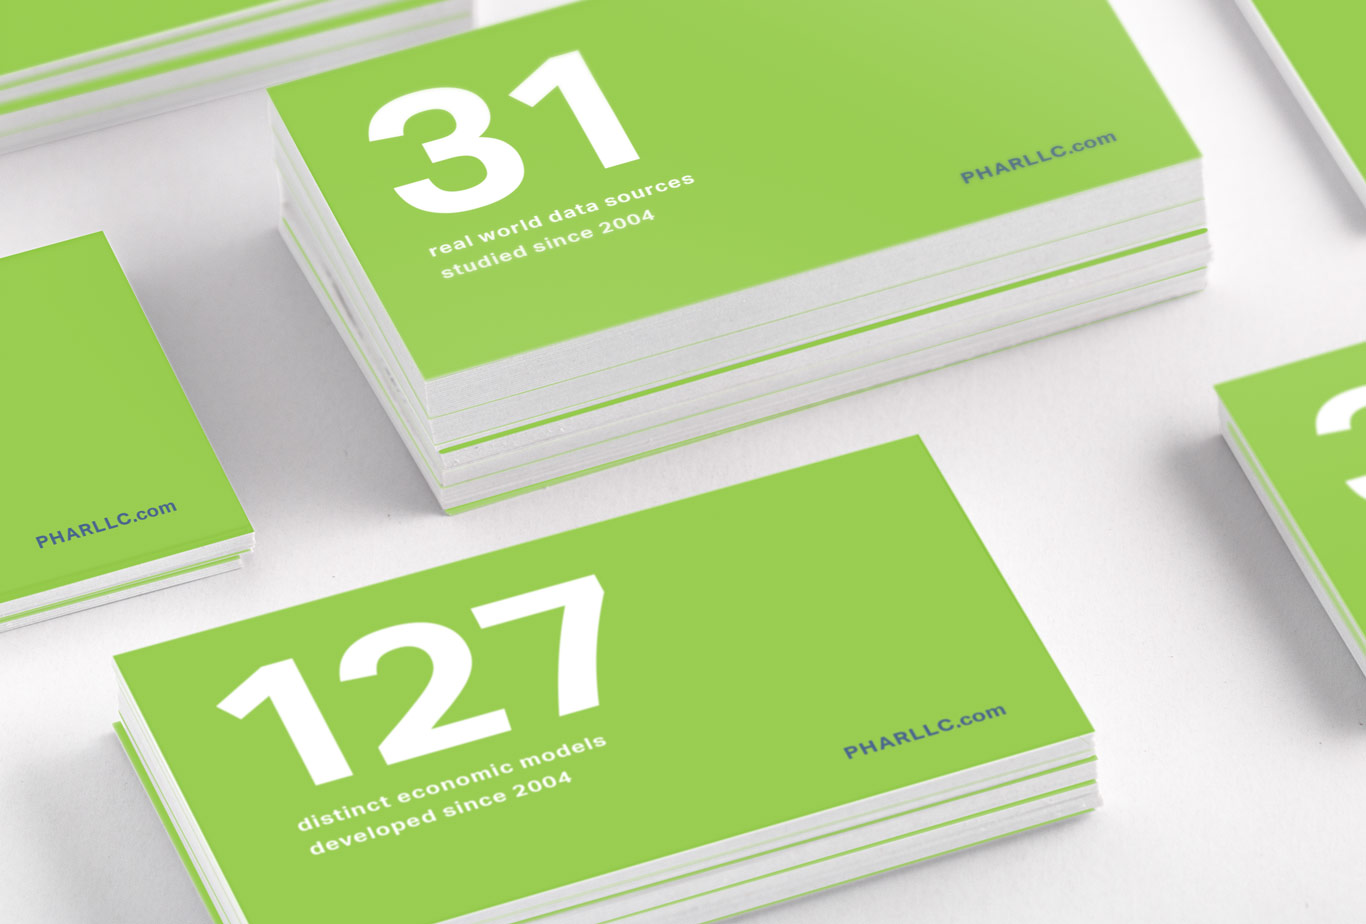 Business cards featuring large statistics